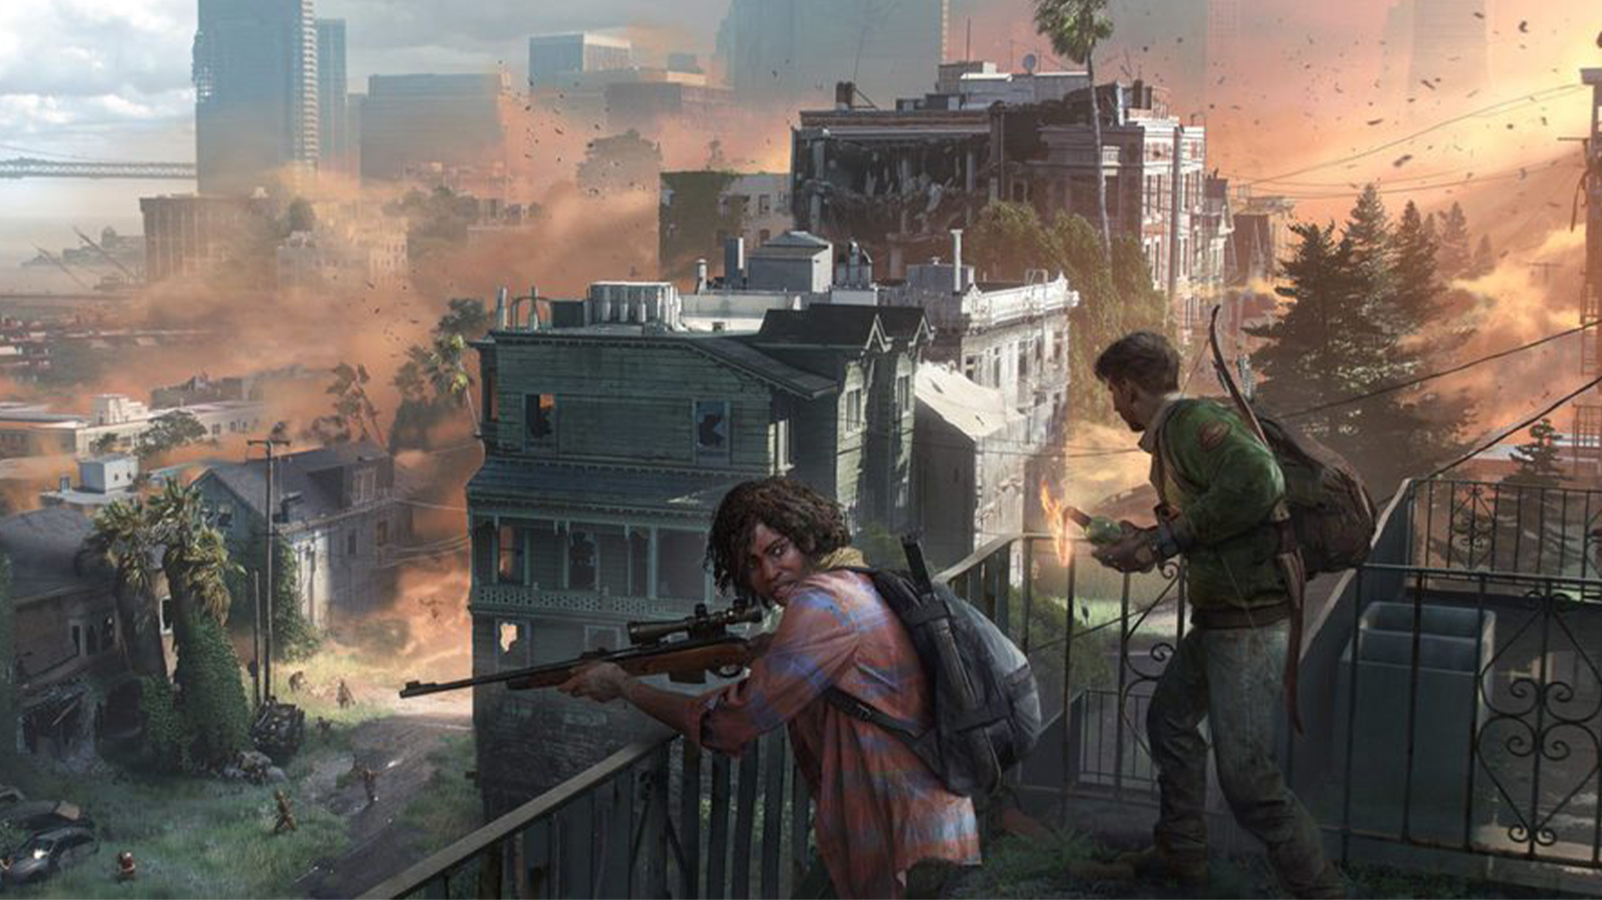 Disappointing News as Naughty Dog Confirms Closure of The Last of Us Online